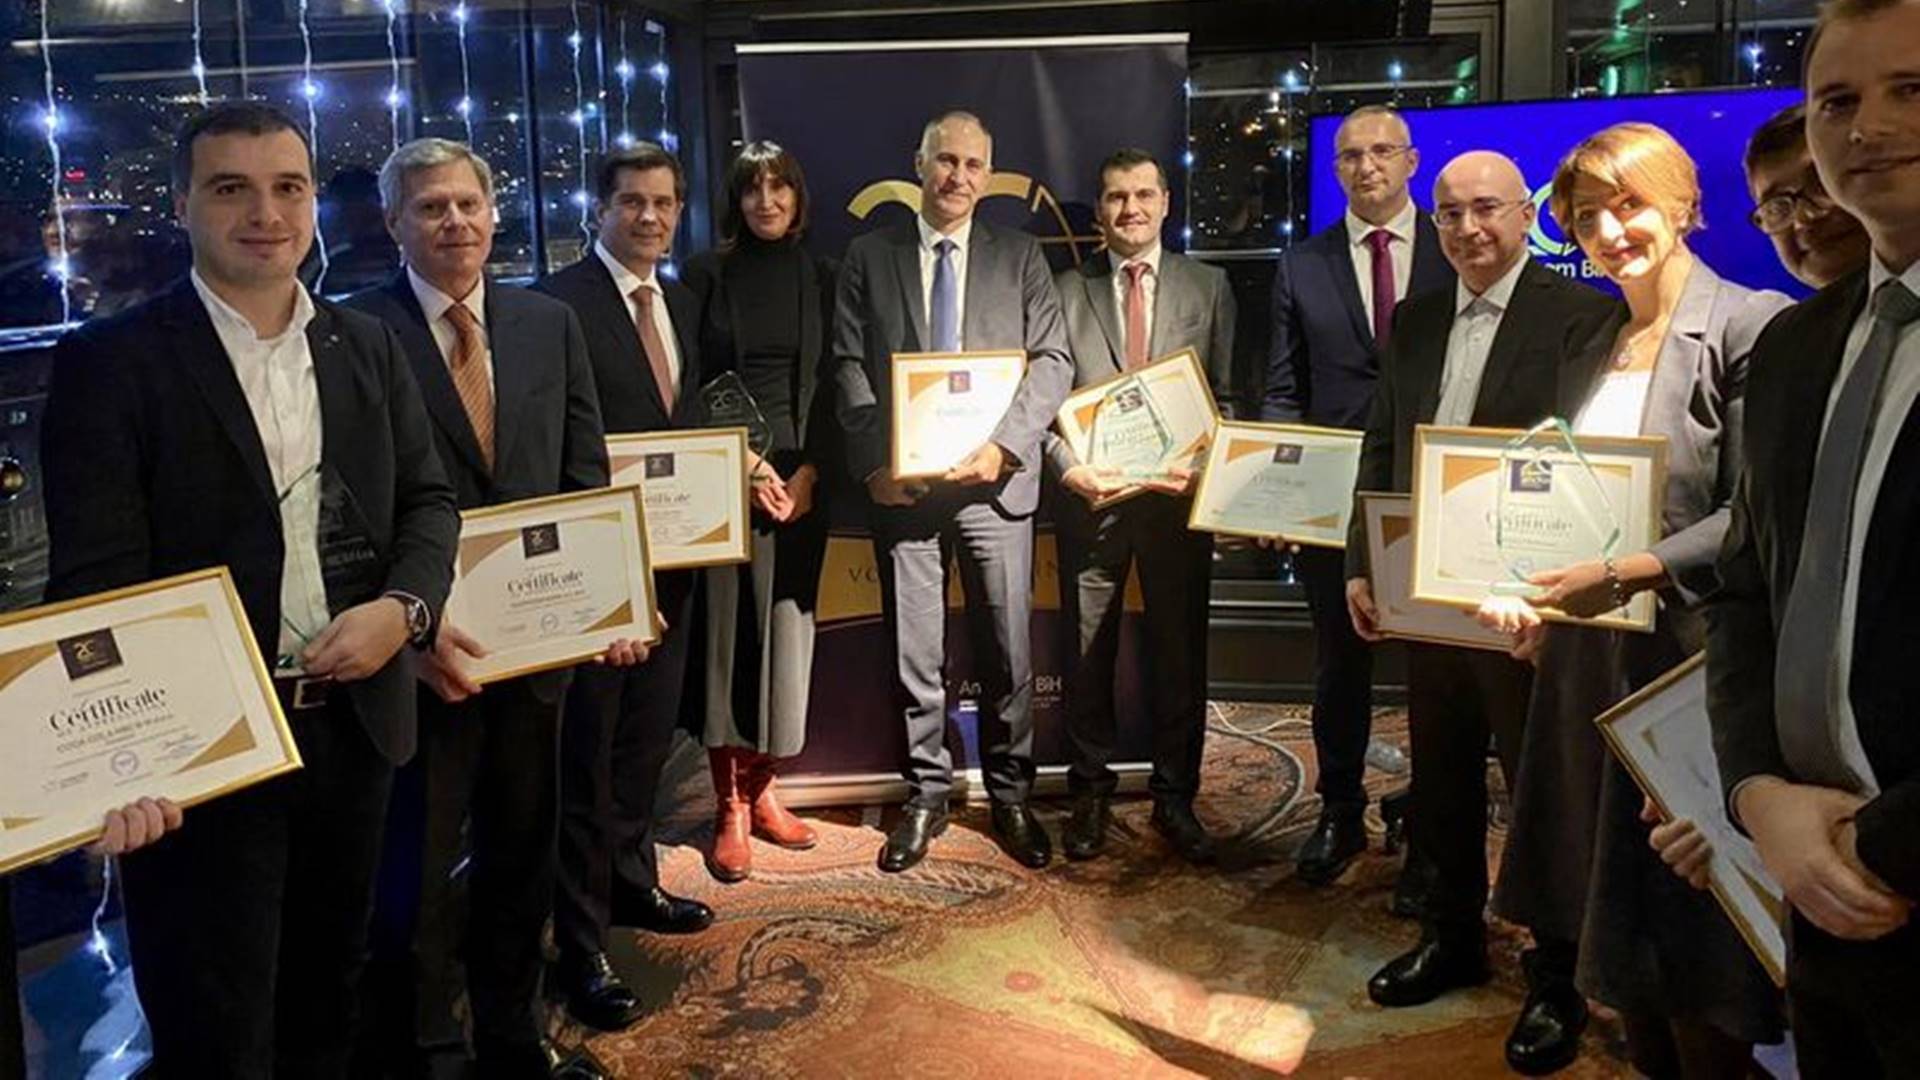 20 years voice of the business community in BiH: The American Chamber of Commerce AmCham BiH